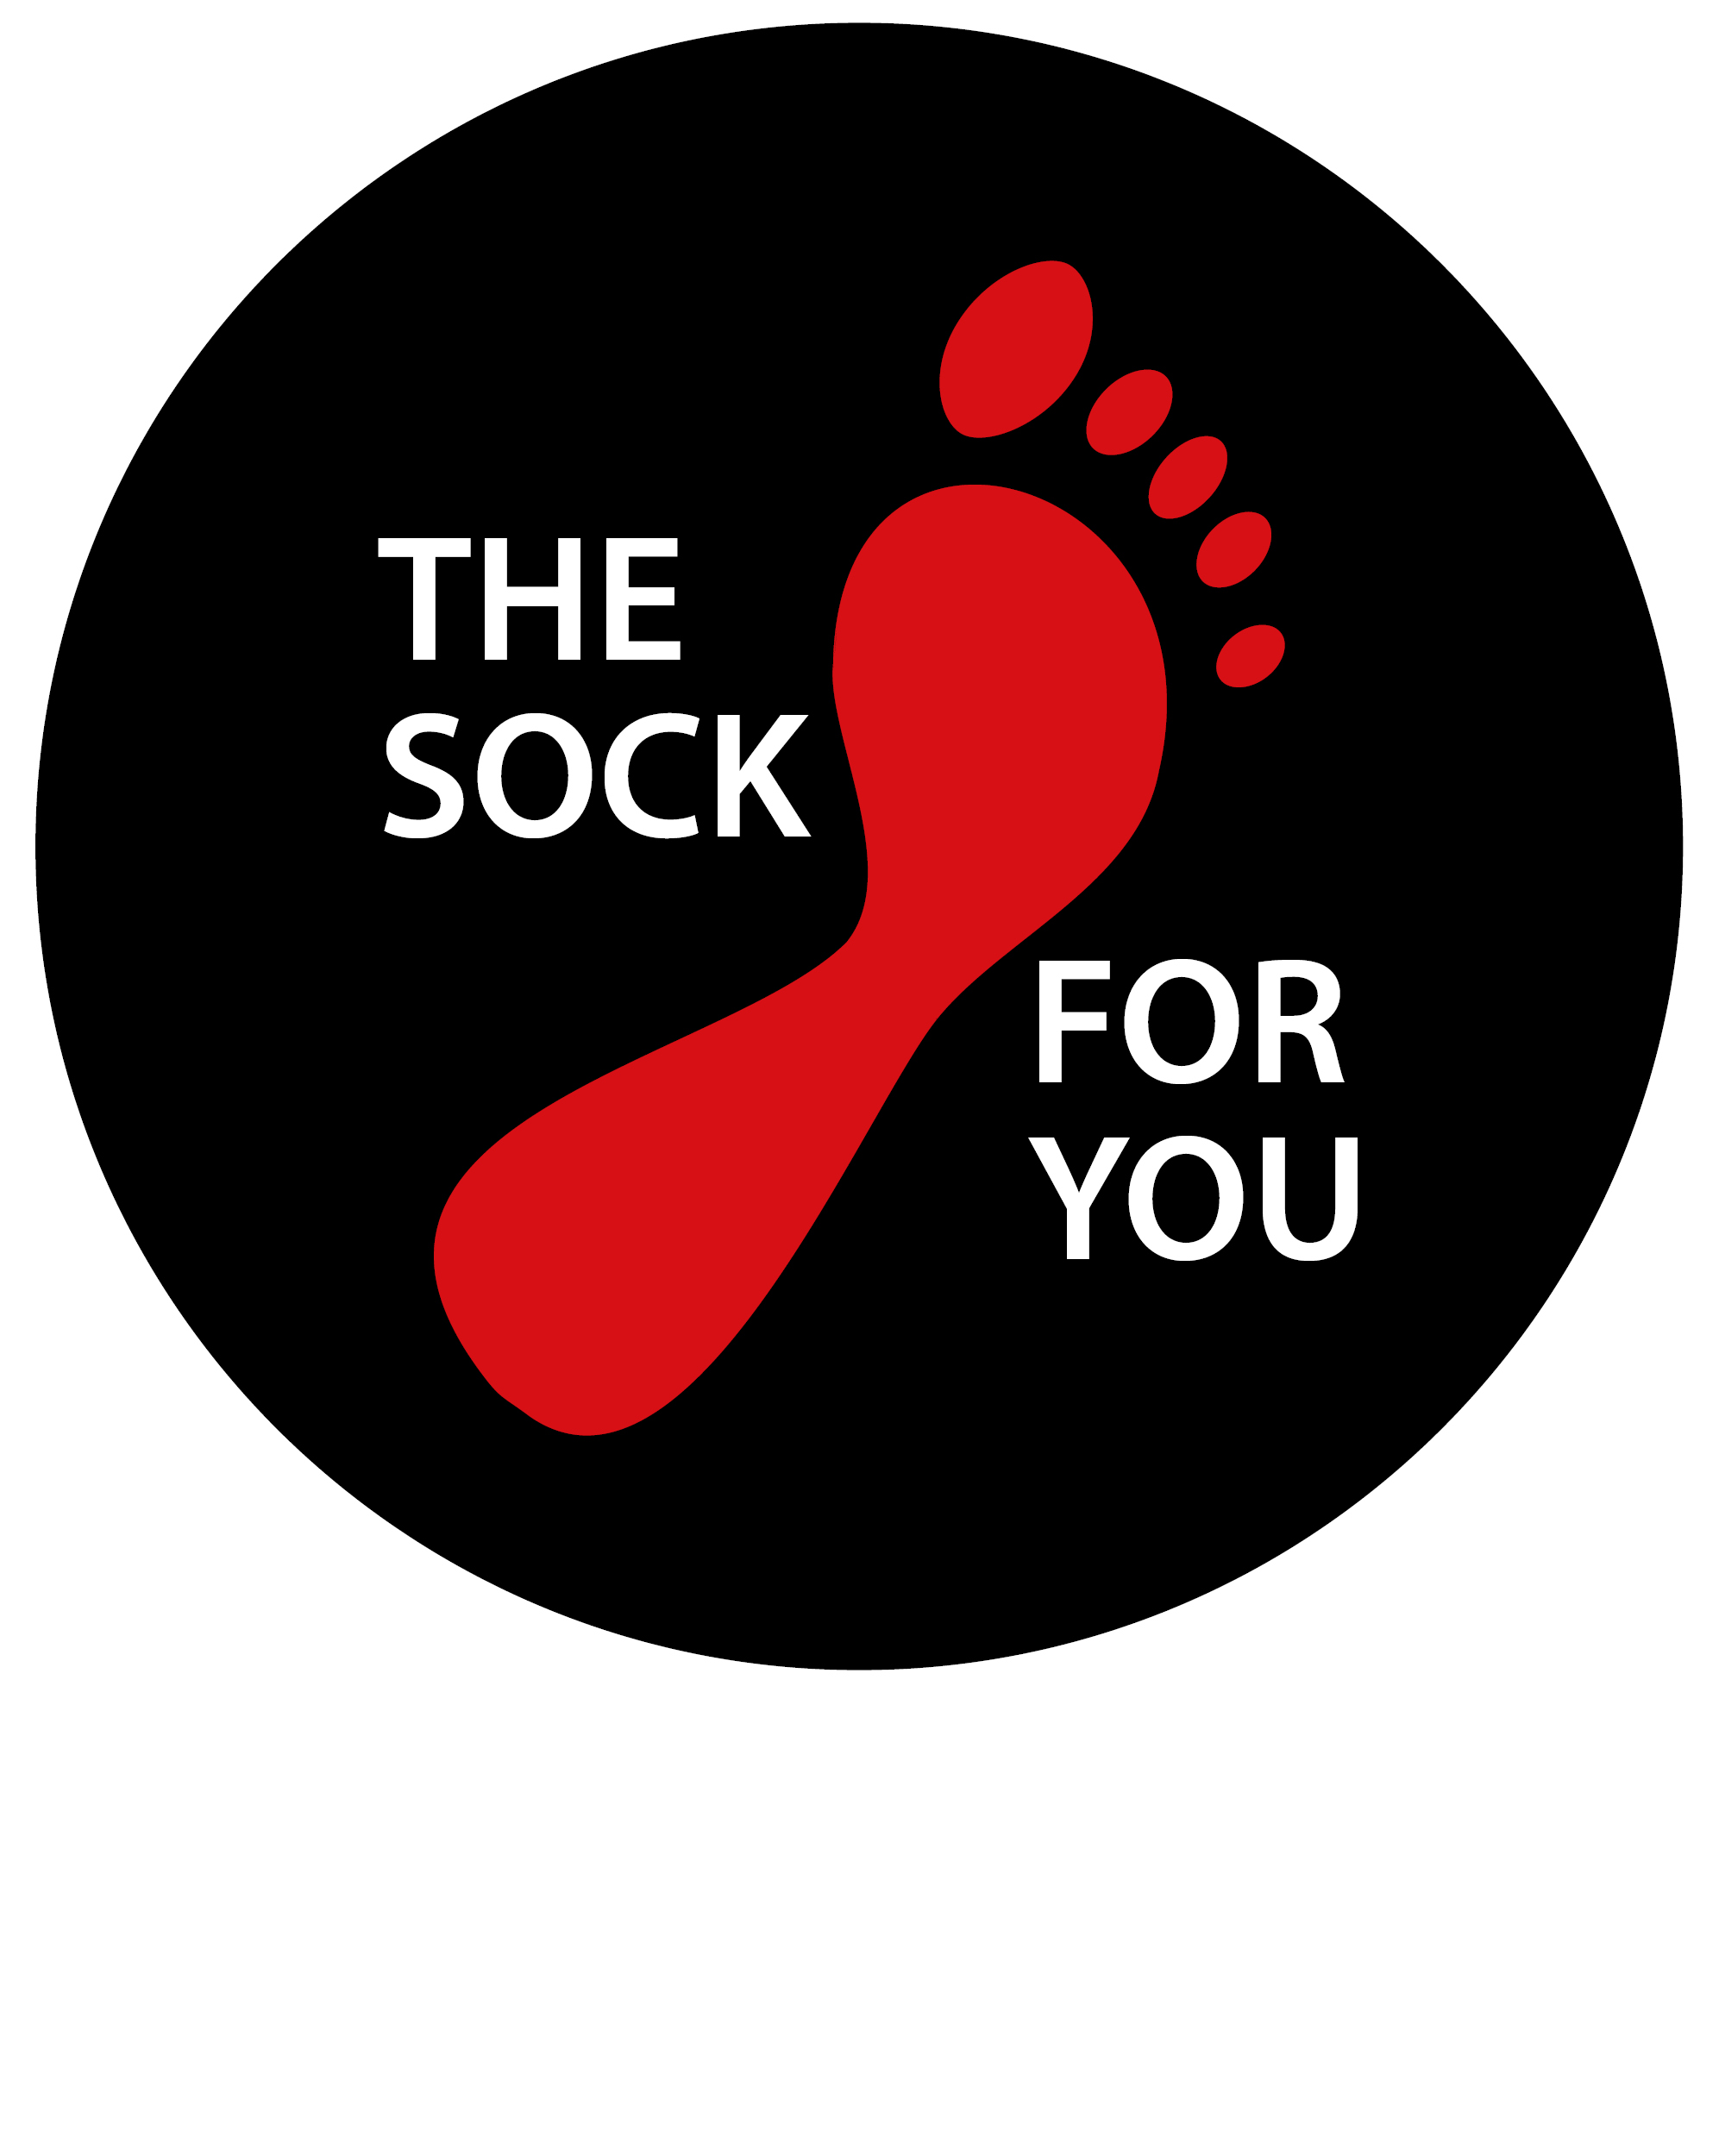 THE SOCK FOR YOU